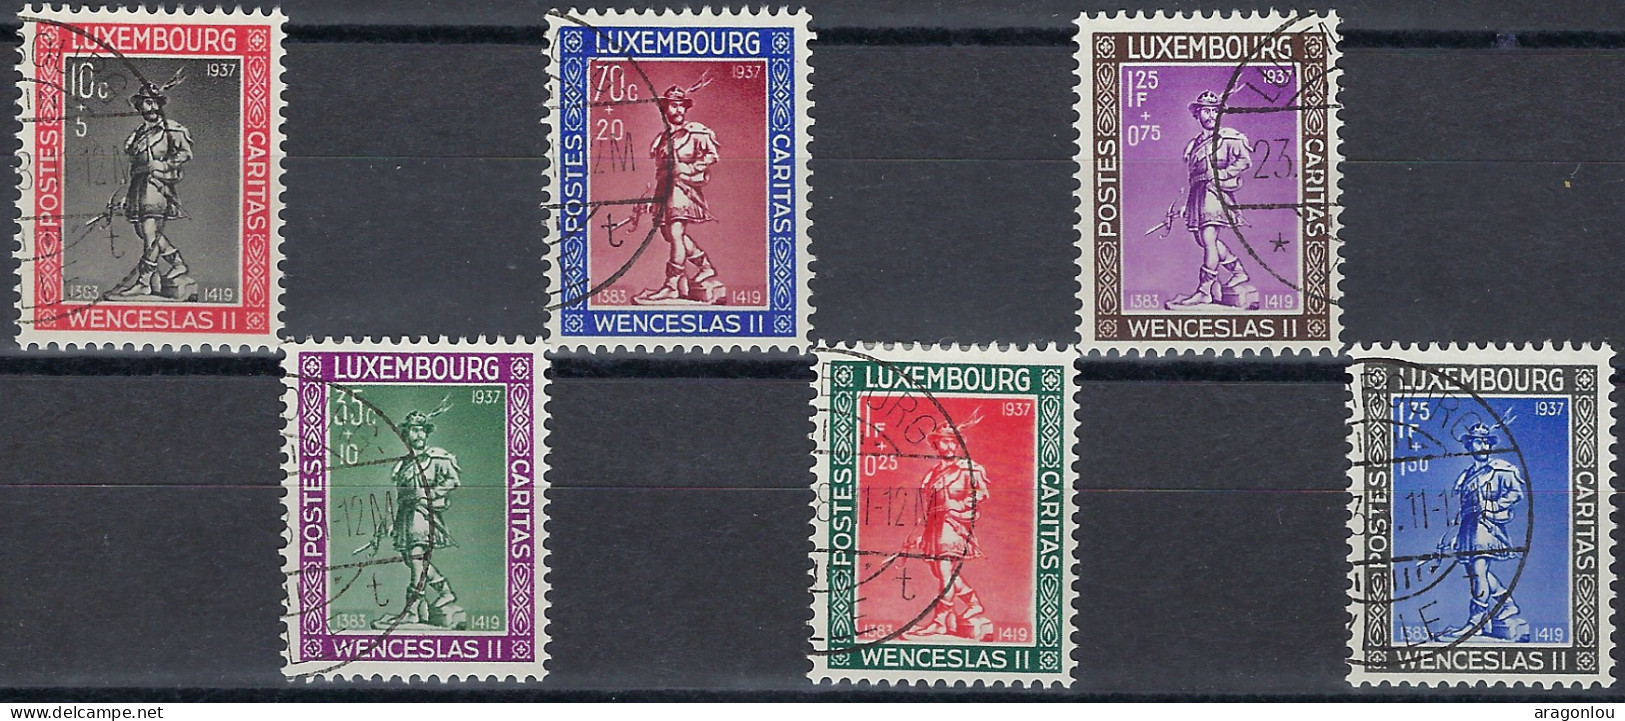 Luxembourg - Luxemburrg - Timbres  1937   Wenzels II      Série   ° - Used Stamps